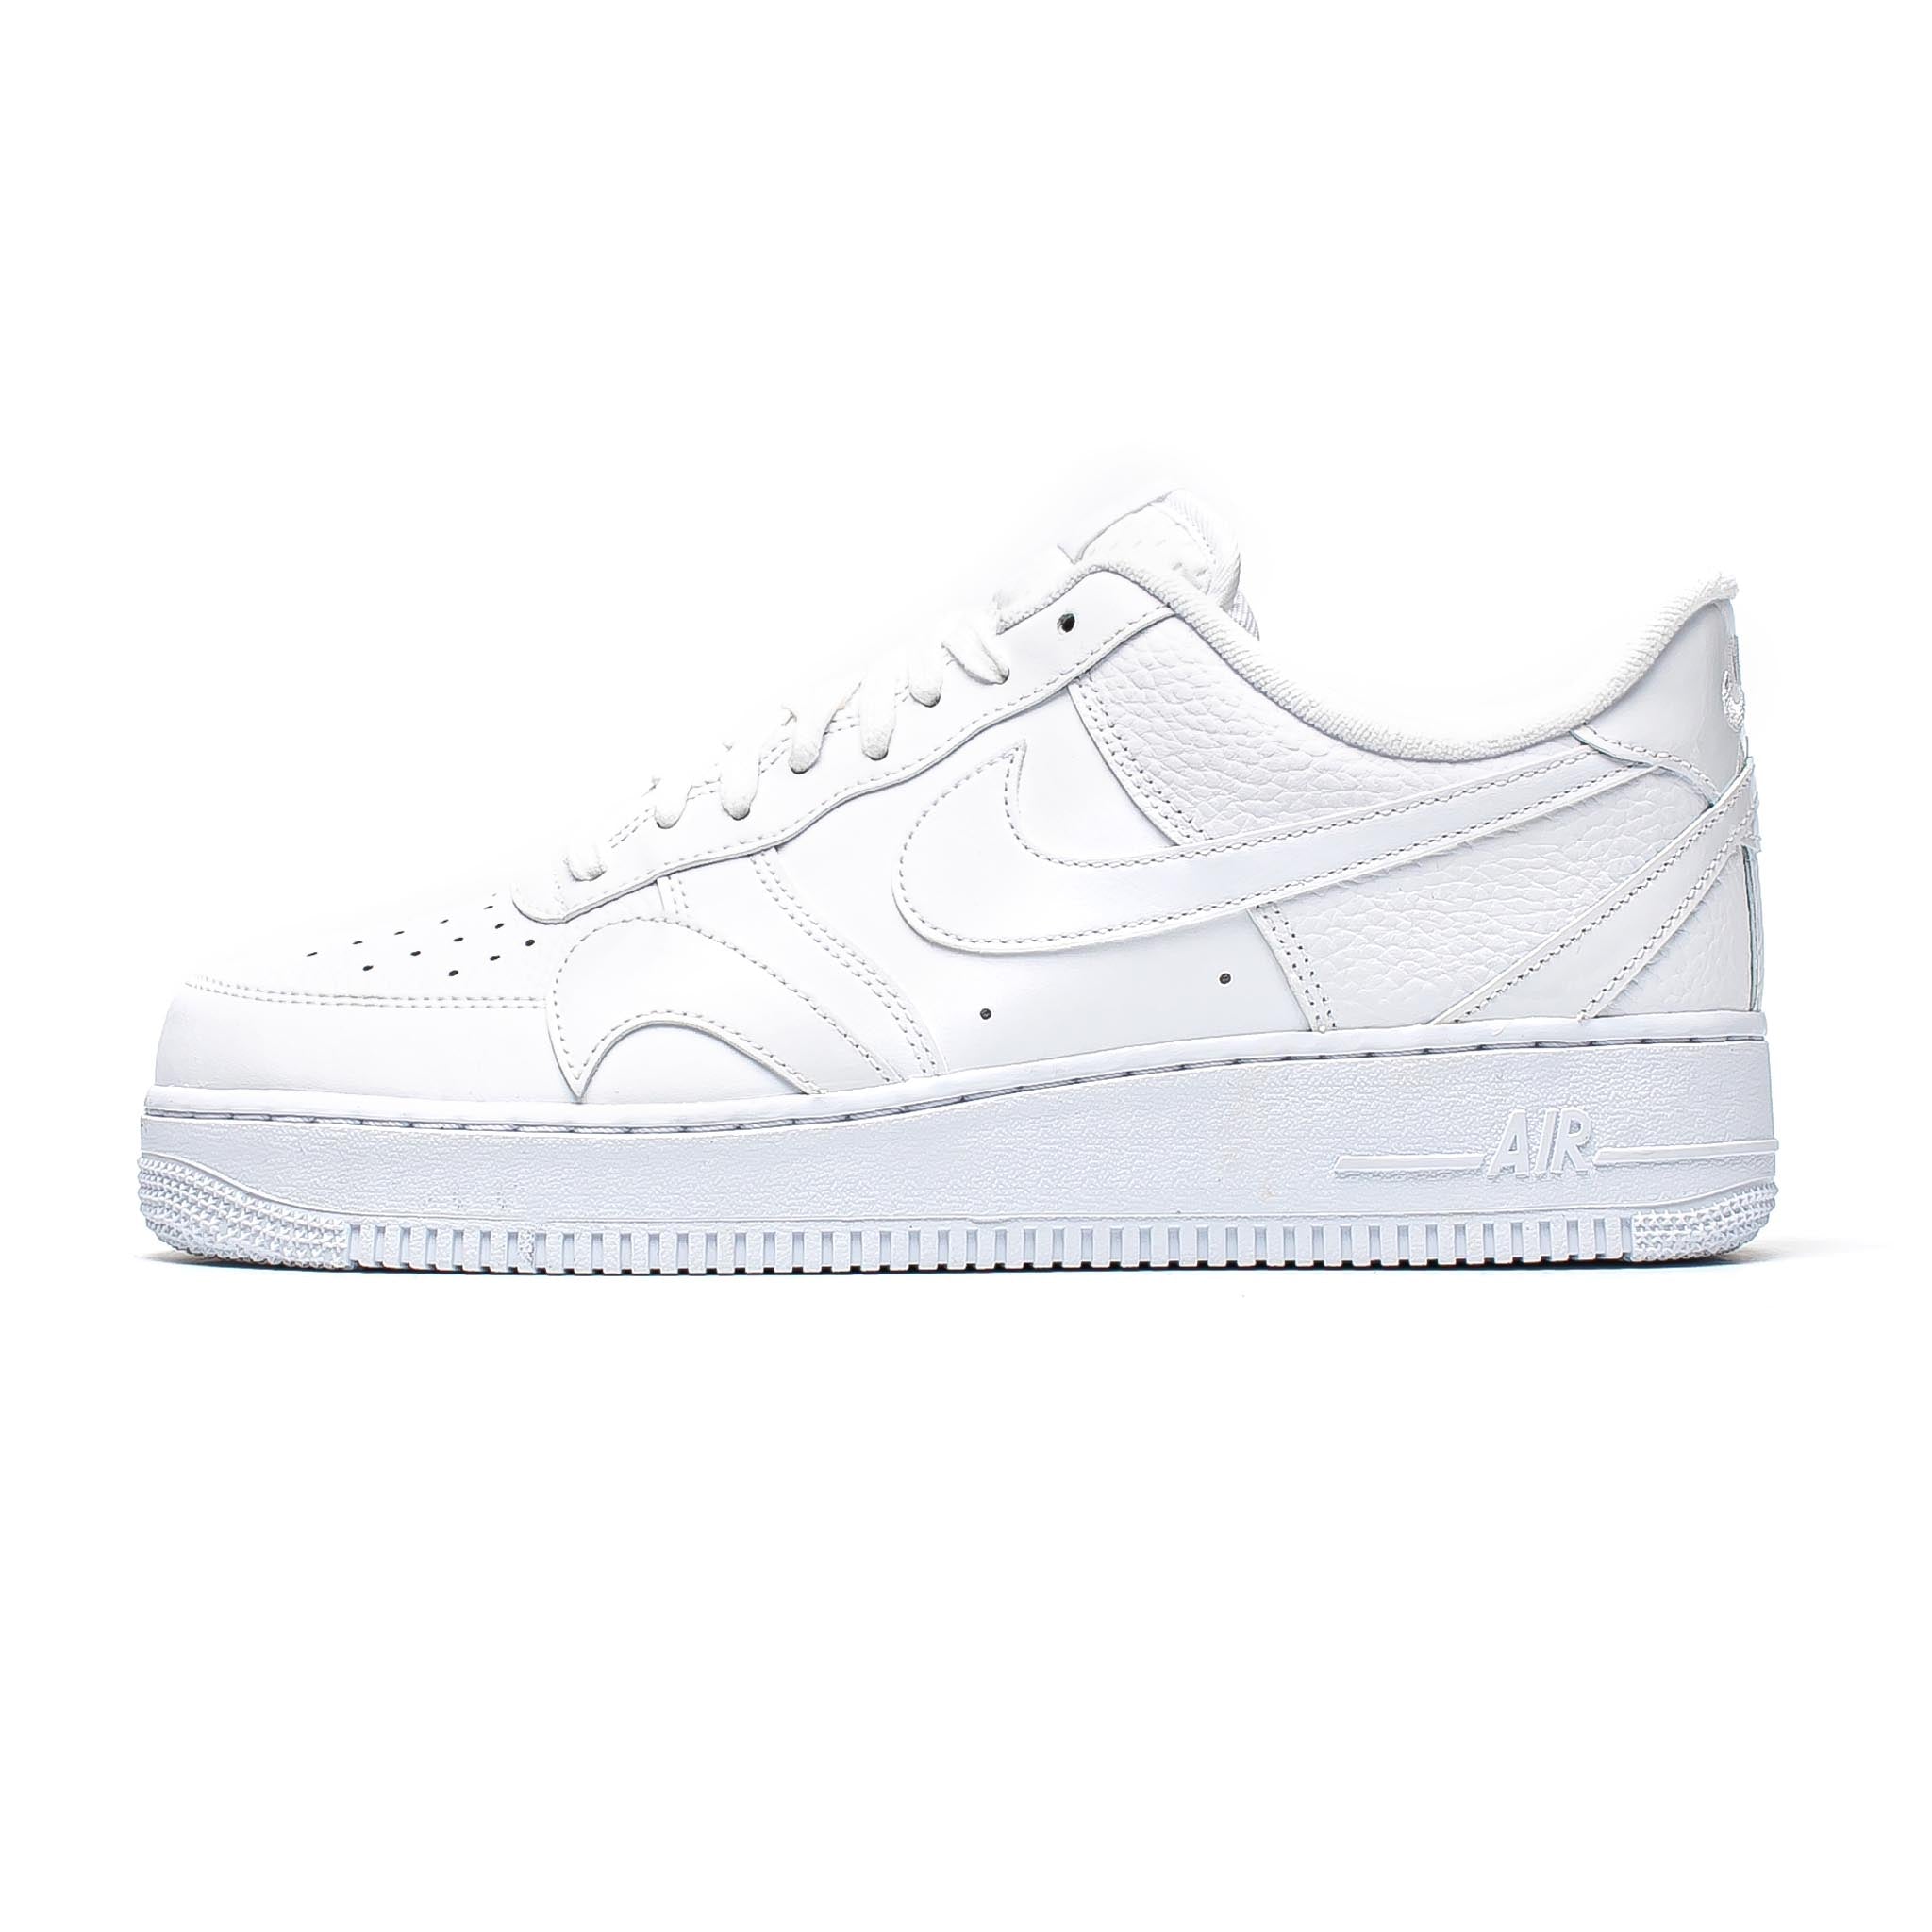 Nike Air Force 1 '07 LV8 2 'Misplaced Swooshes' White